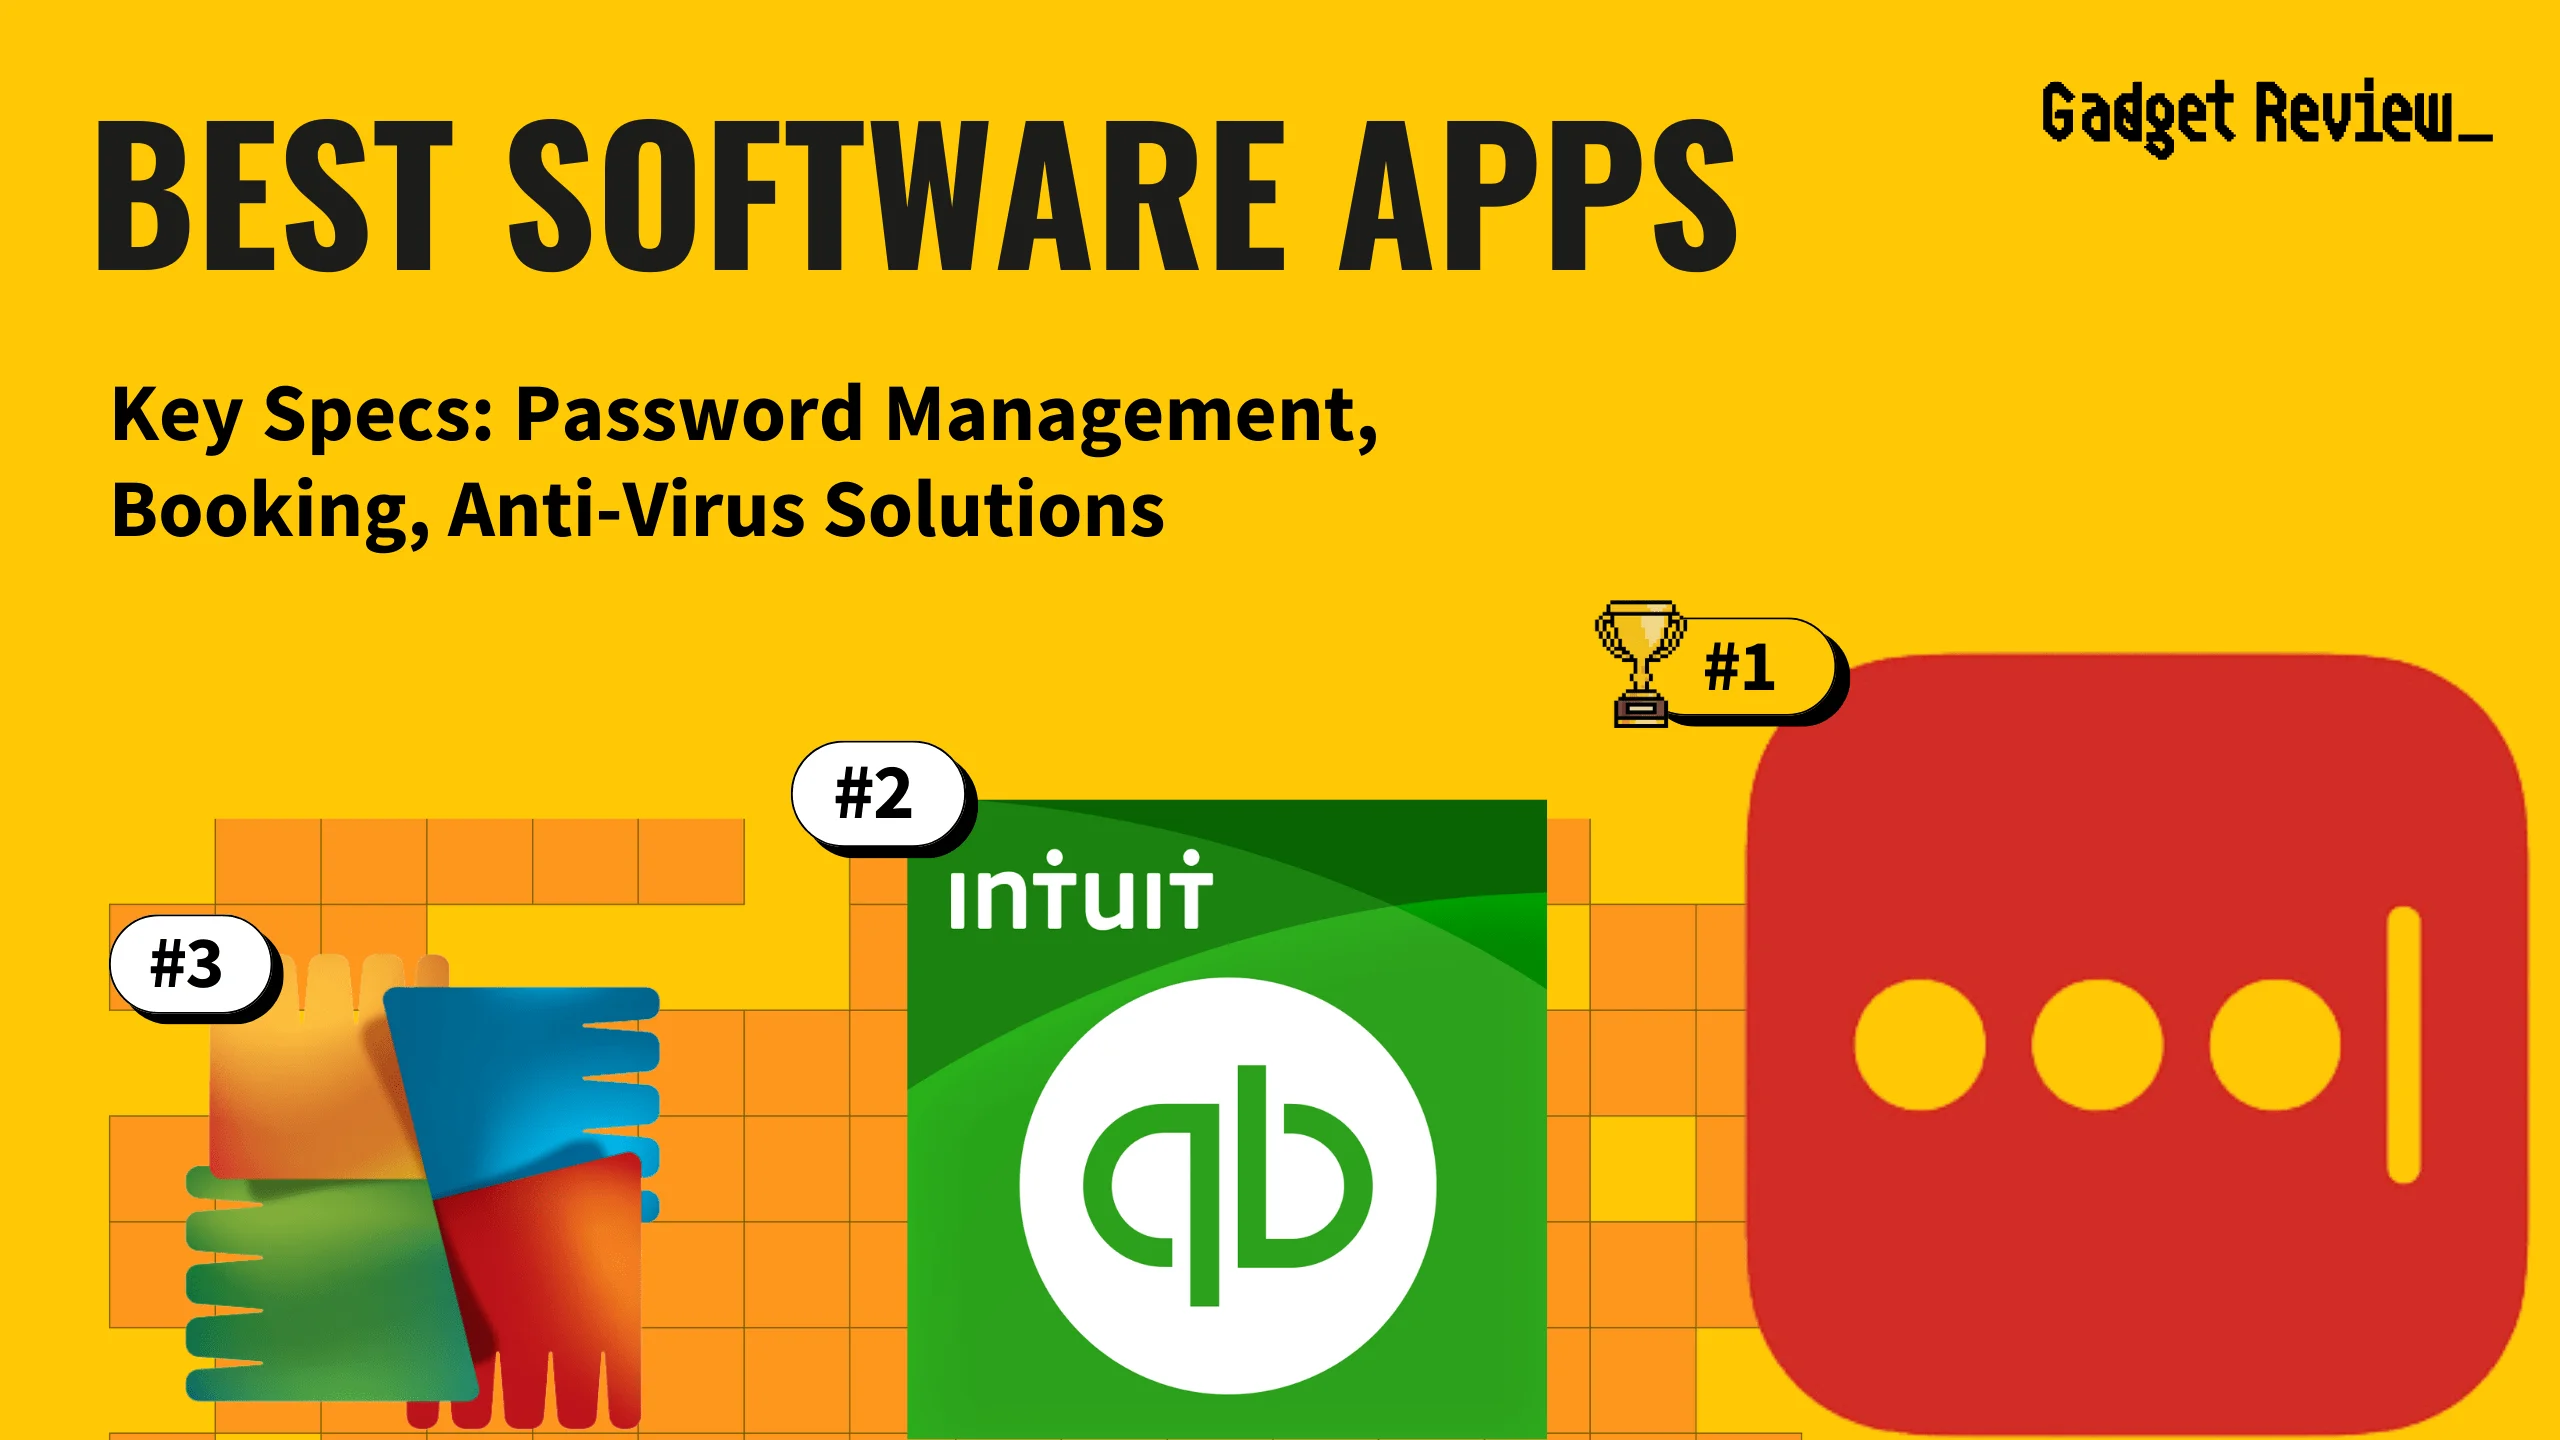 best software apps featured image that shows the top three best software & app models